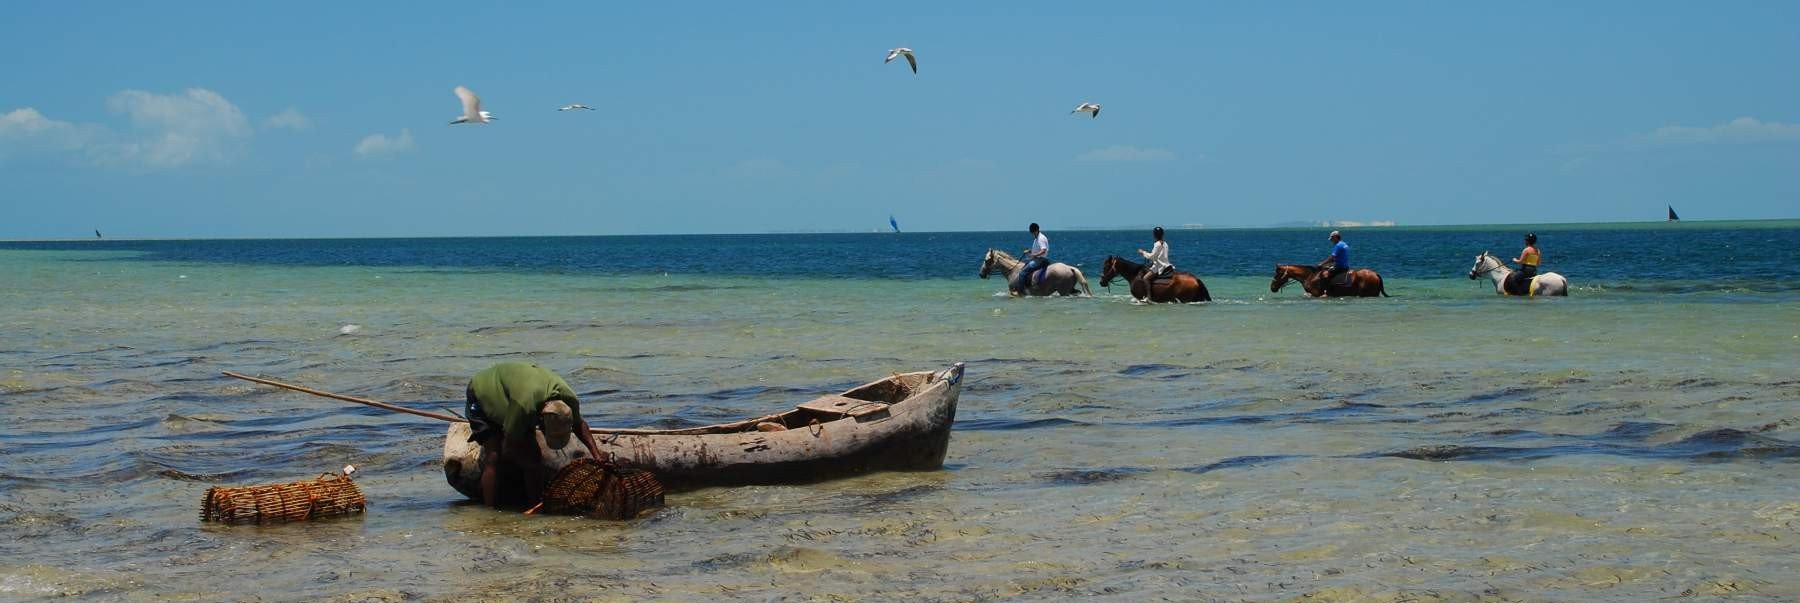 10 Best Reasons to go on a Horse Riding Holiday in Africa